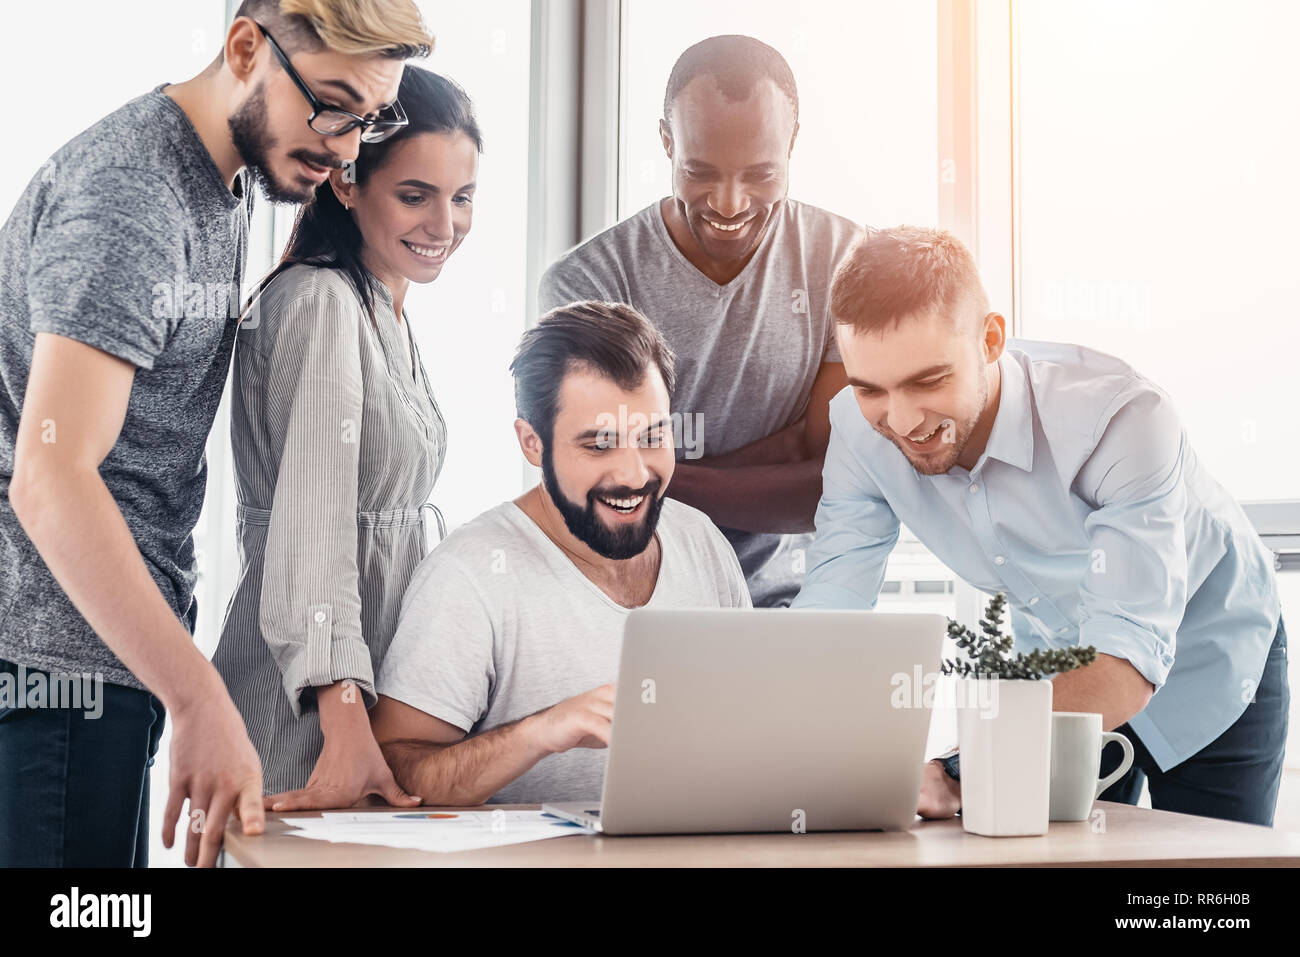 Five diverse business people talking together over a laptop while working at a table in office boardroom. Business team working on their business project together at office. Bright light in the upper right corner Stock Photo